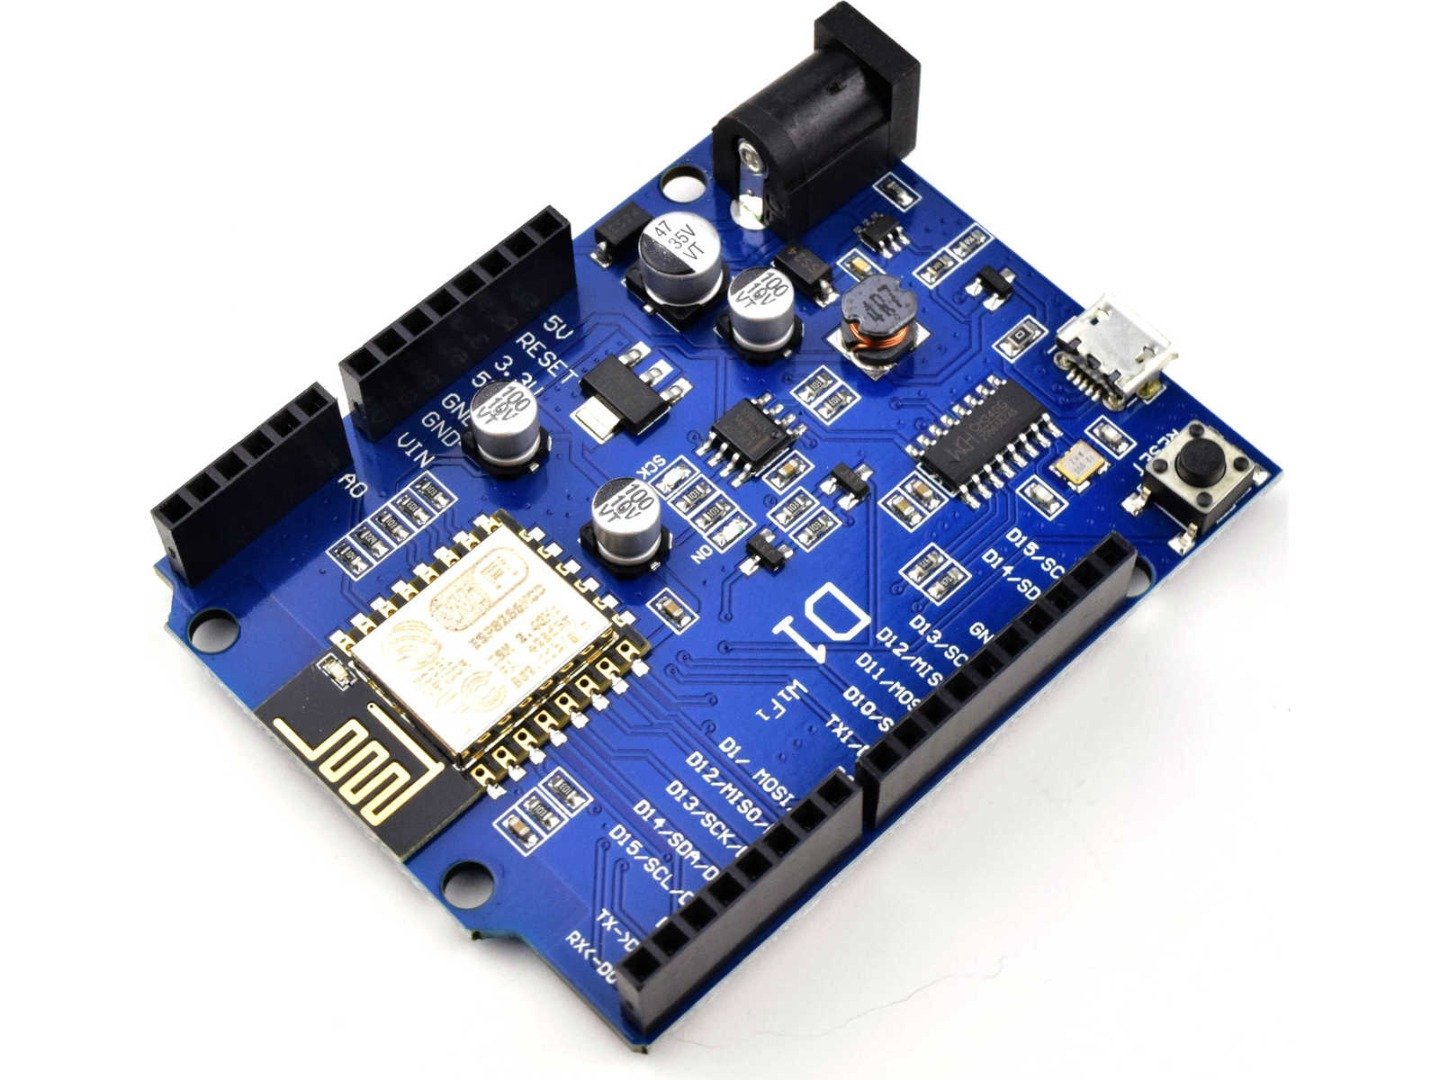 WEMOS D1 ESP8266 Wi-Fi Board 80-160MHz – IoT – compatible with Arduino and NodeMCU 5